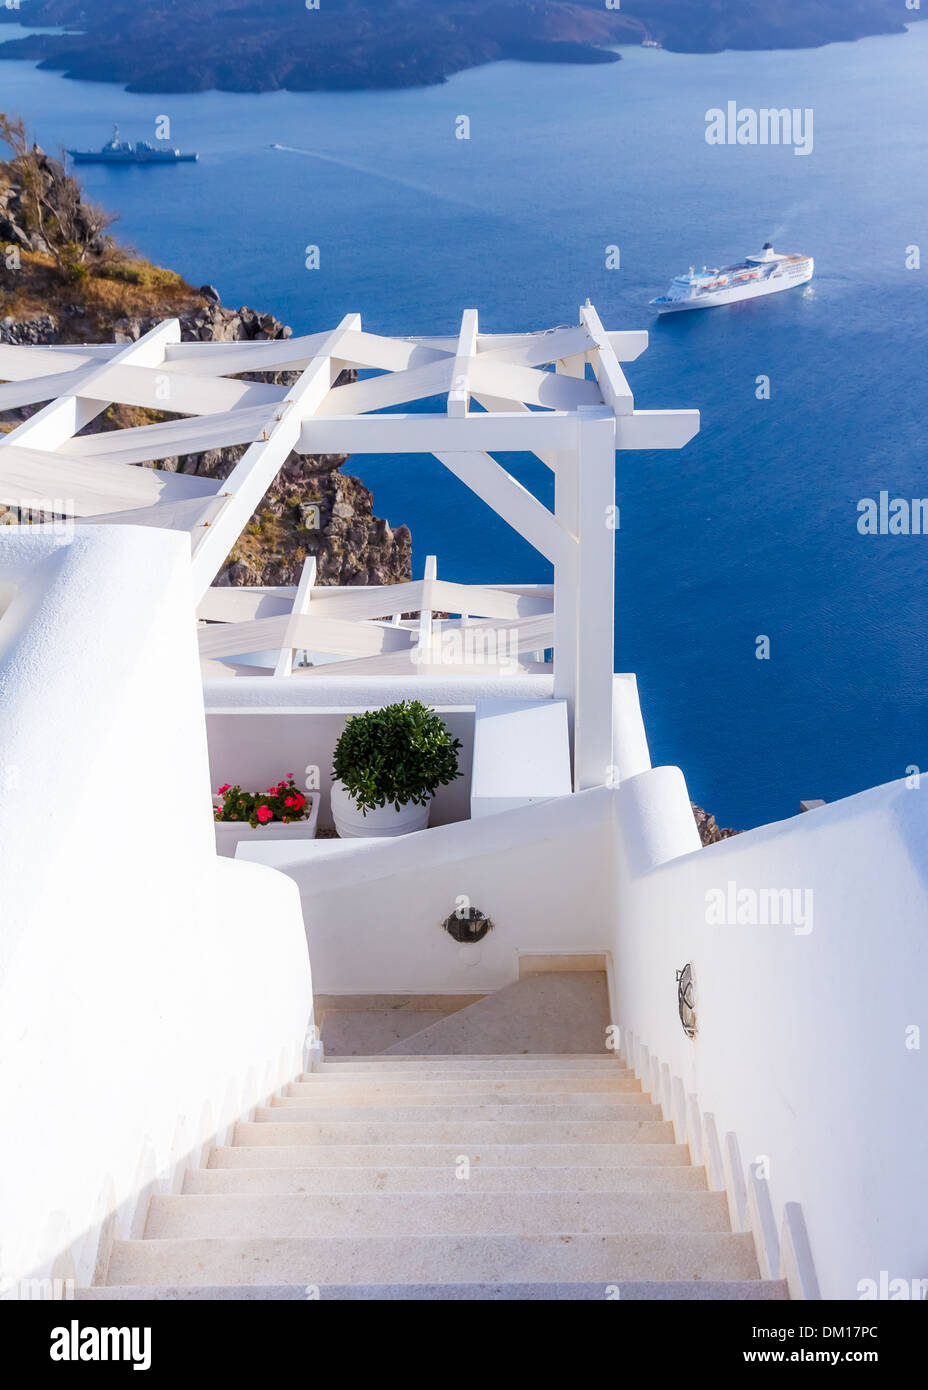 Steps leading downstairs to a hotel or hostel in Santorini, Greece Stock Photo